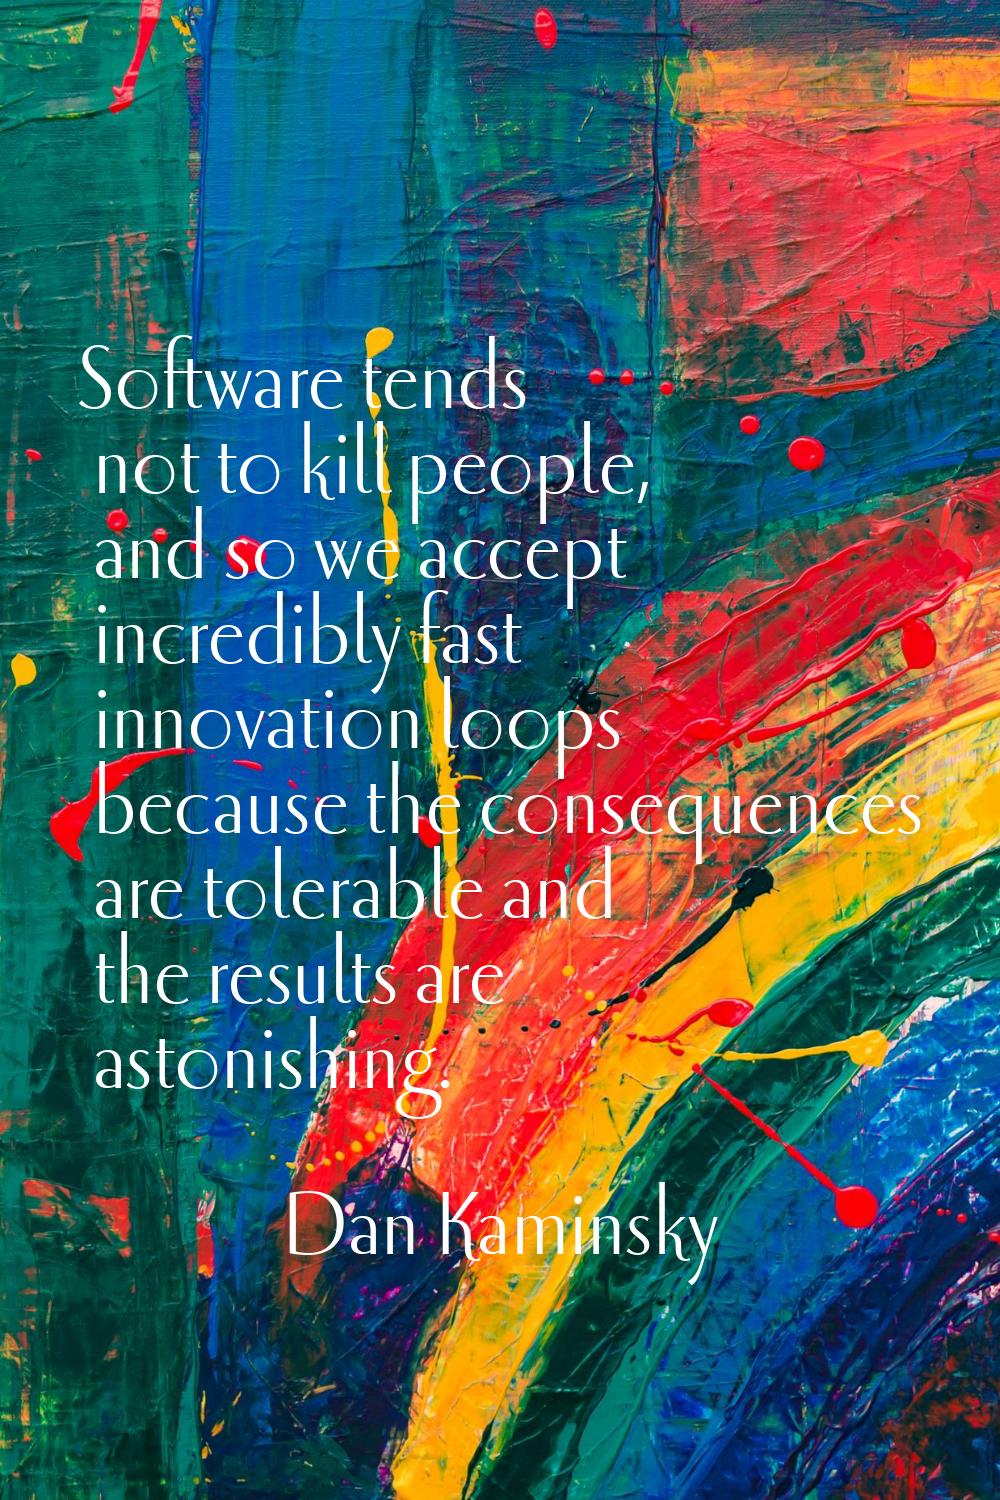 Software tends not to kill people, and so we accept incredibly fast innovation loops because the co